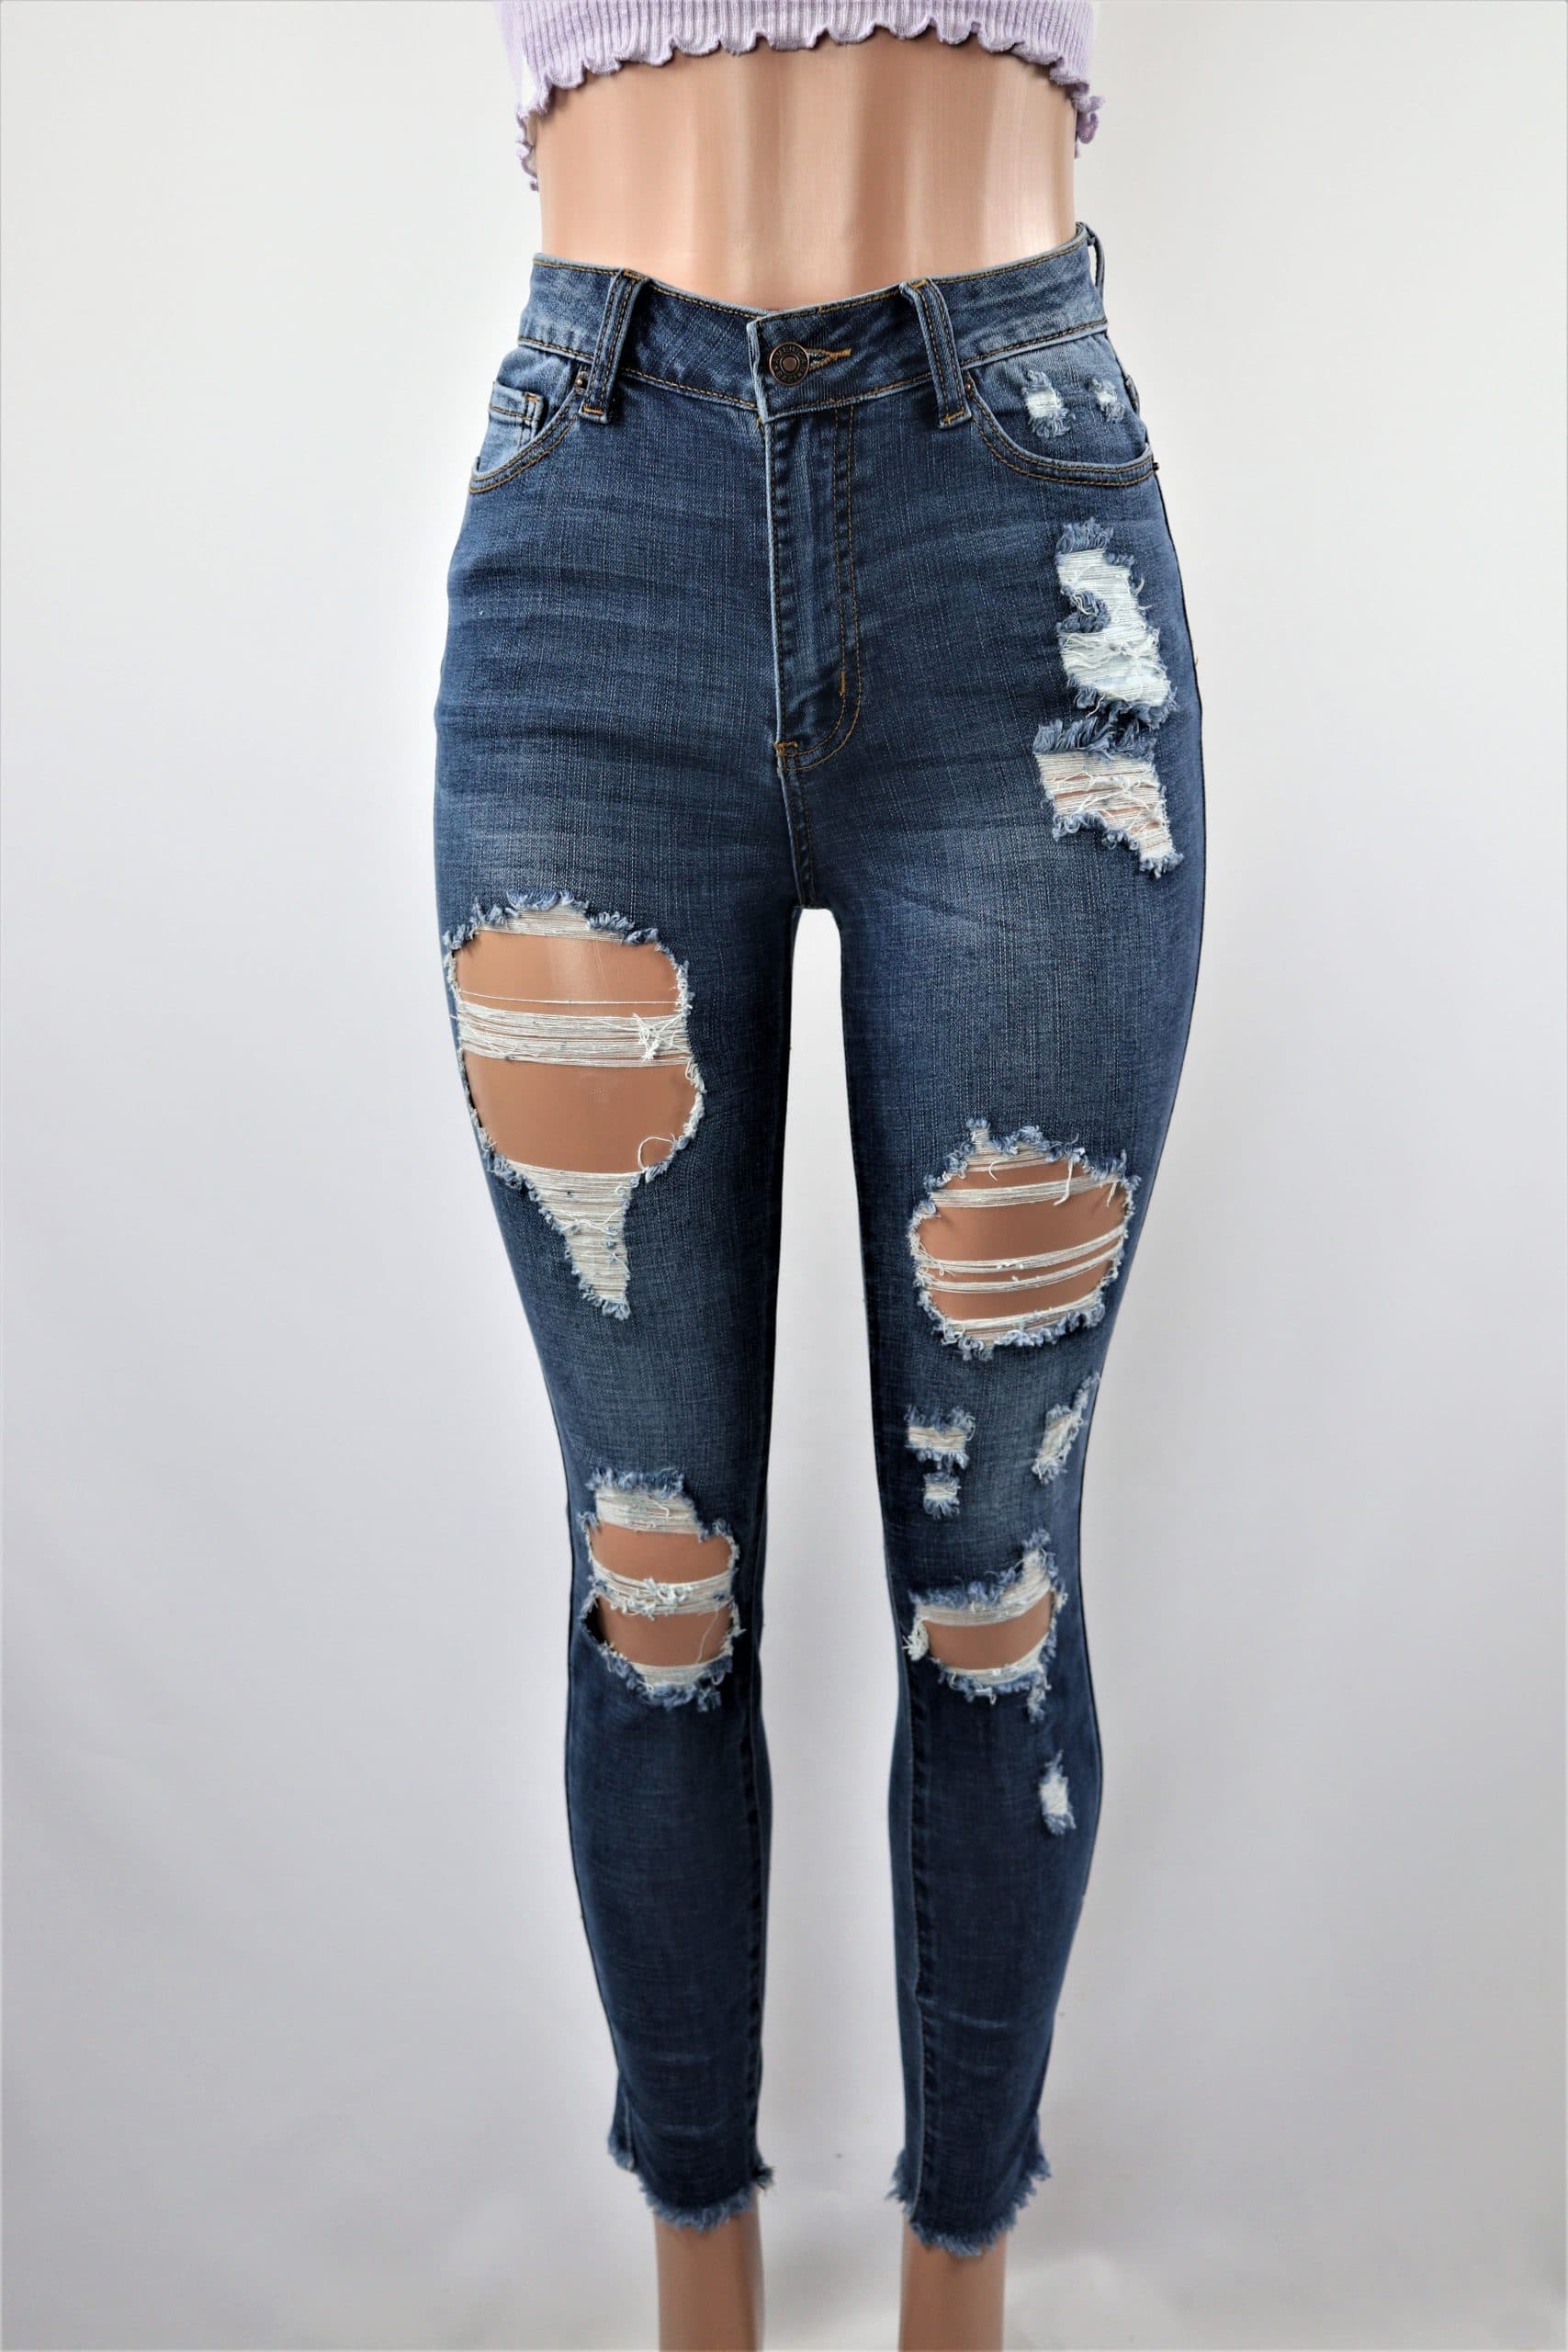 Tough It Out Jeans - High waist medium blue was skinny ripped jeans.